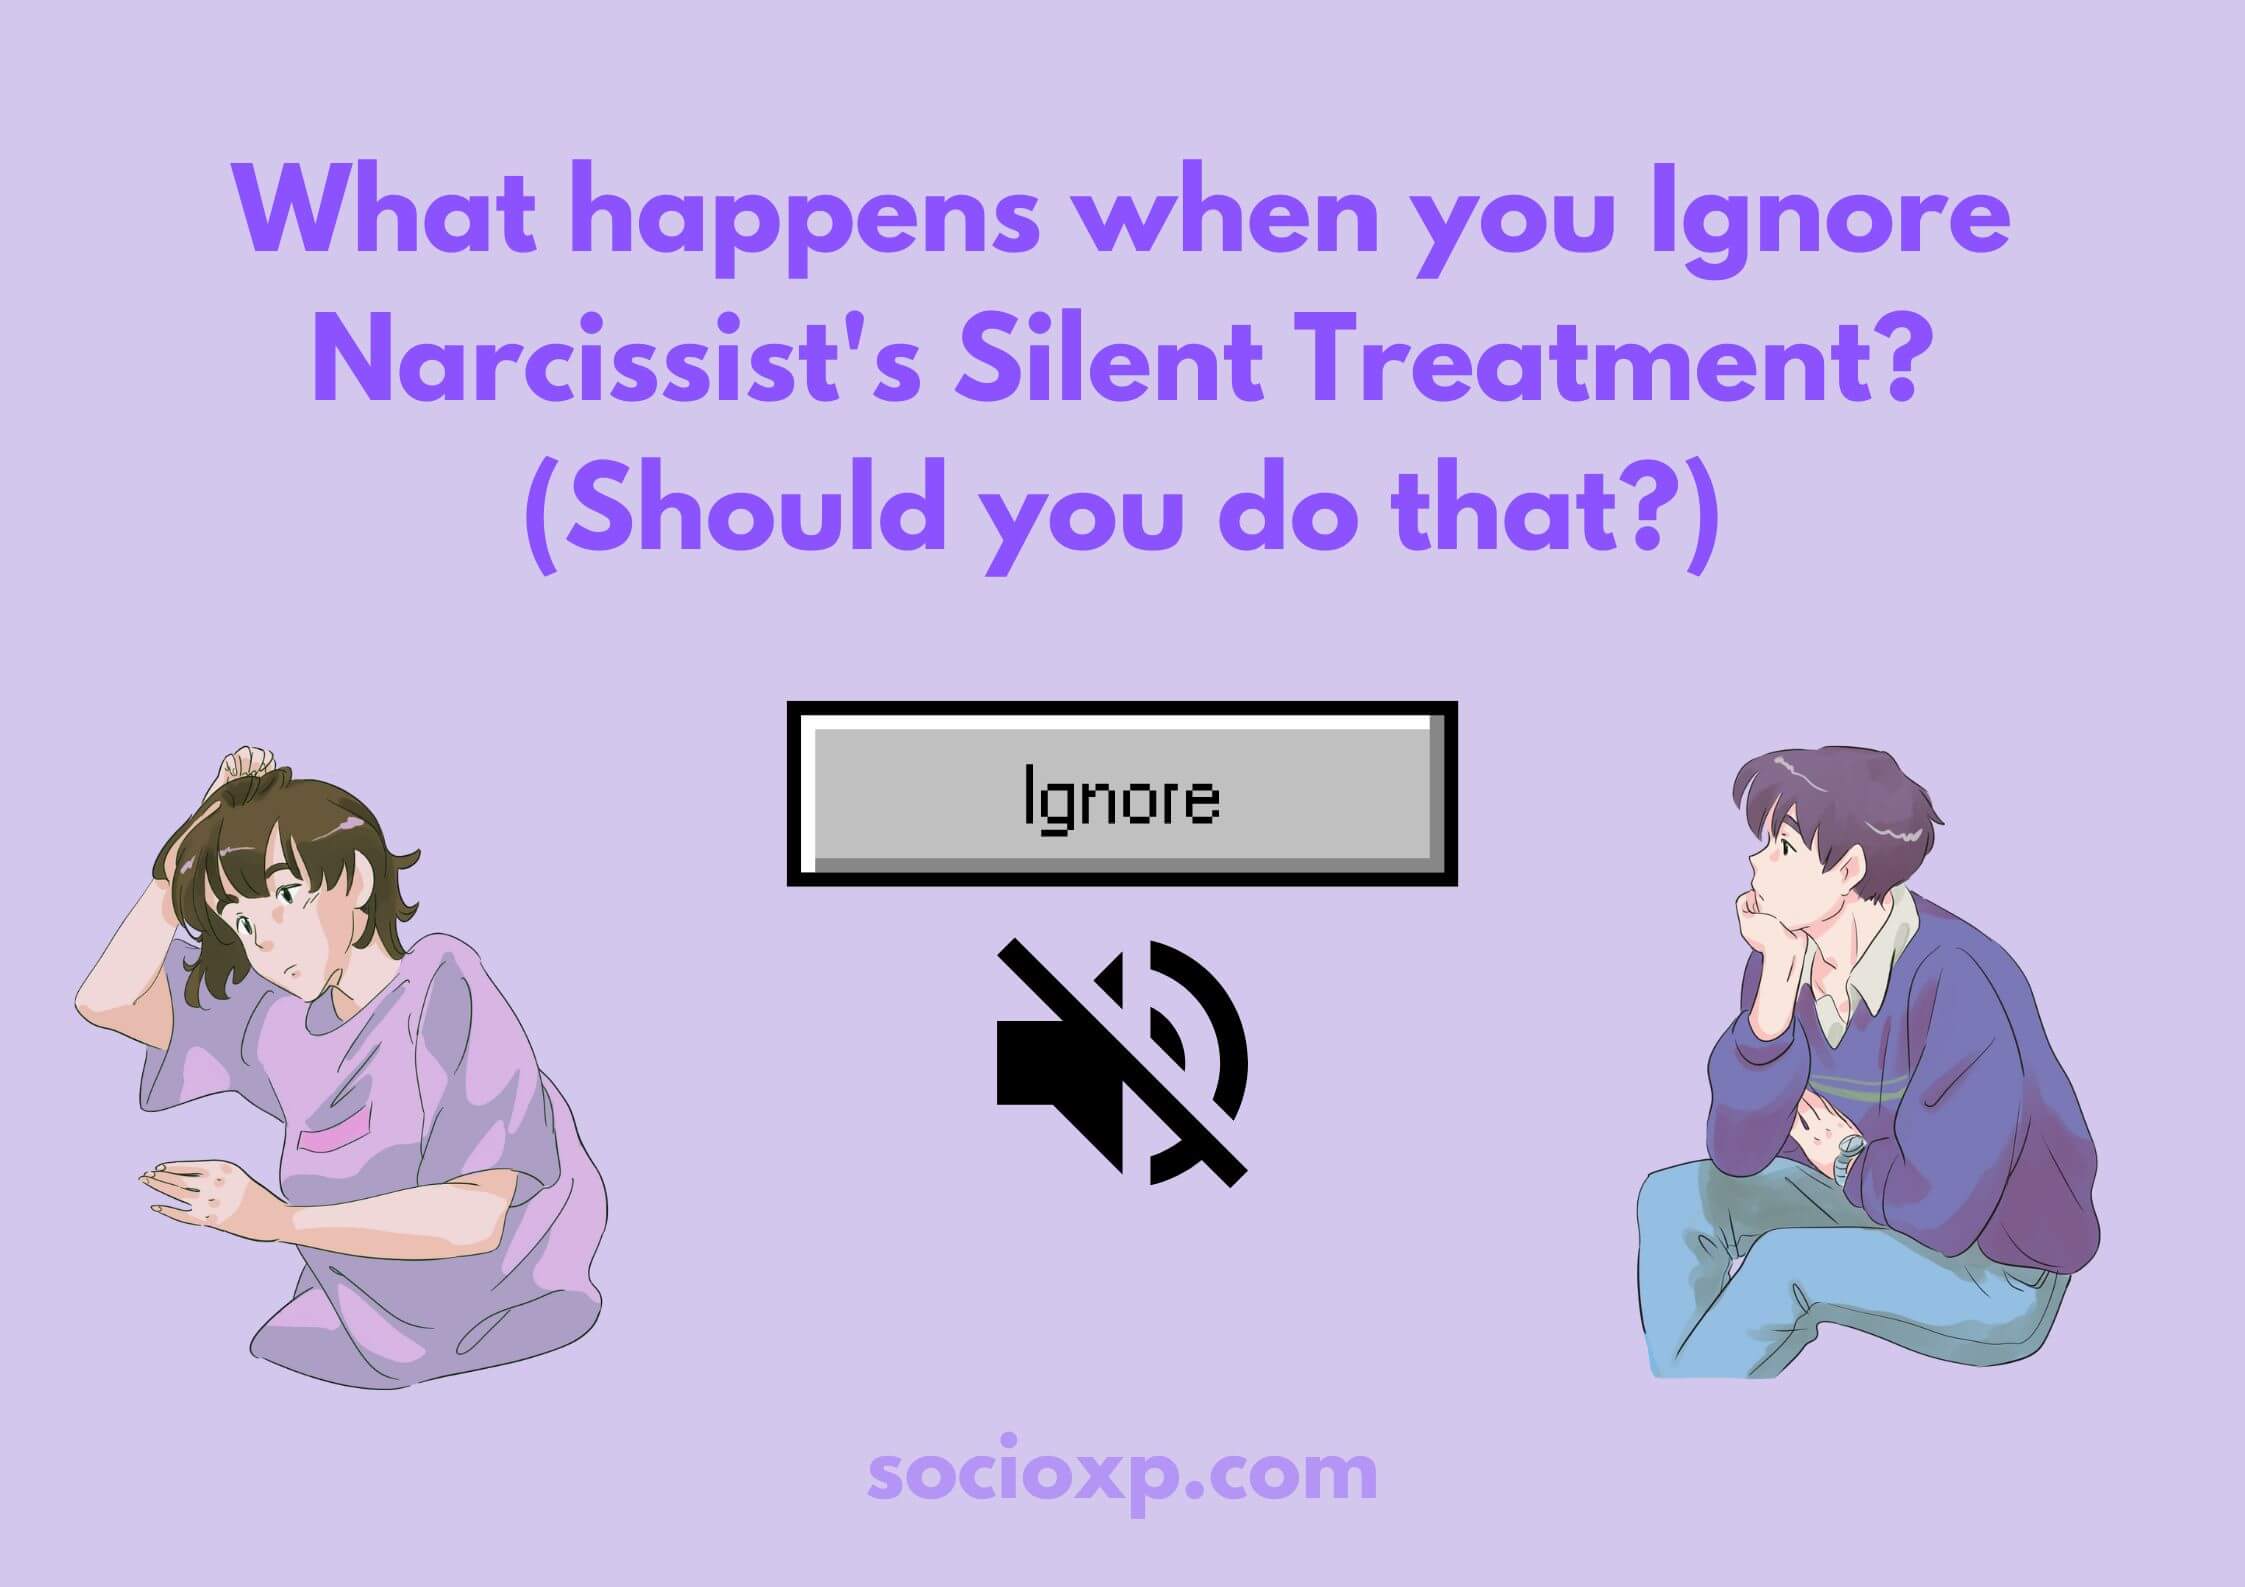 What Happens When You Ignore Narcissist's Silent Treatment? (Should You Do That?)